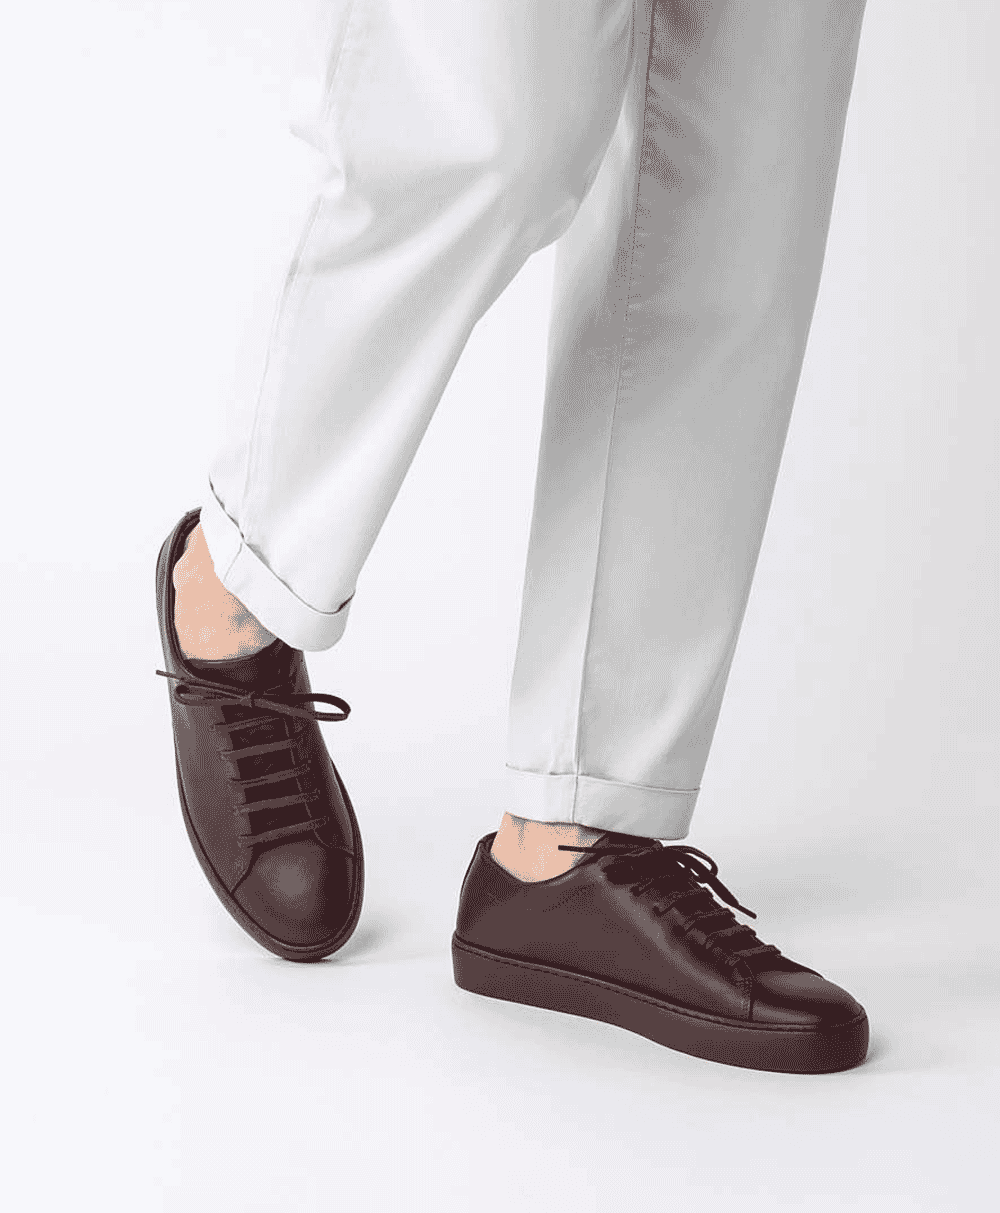 How to wear a suit with sneakers in 2023 | OPUMO Magazine | OPUMO Magazine